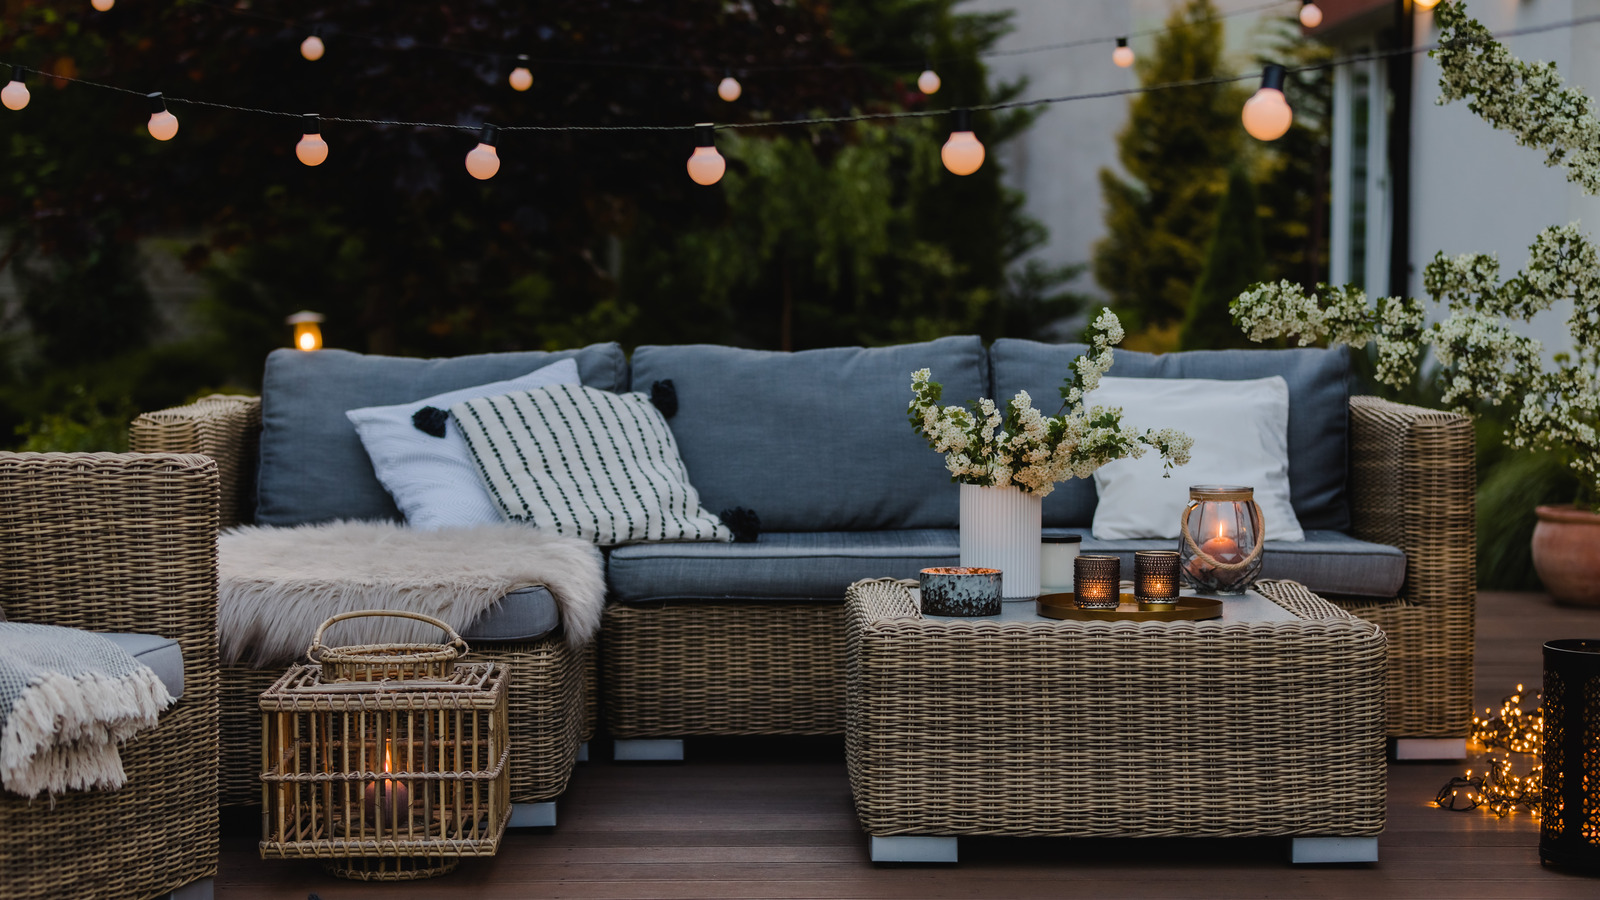 60 Outdoor Patio Ideas That Can Revamp Your Space